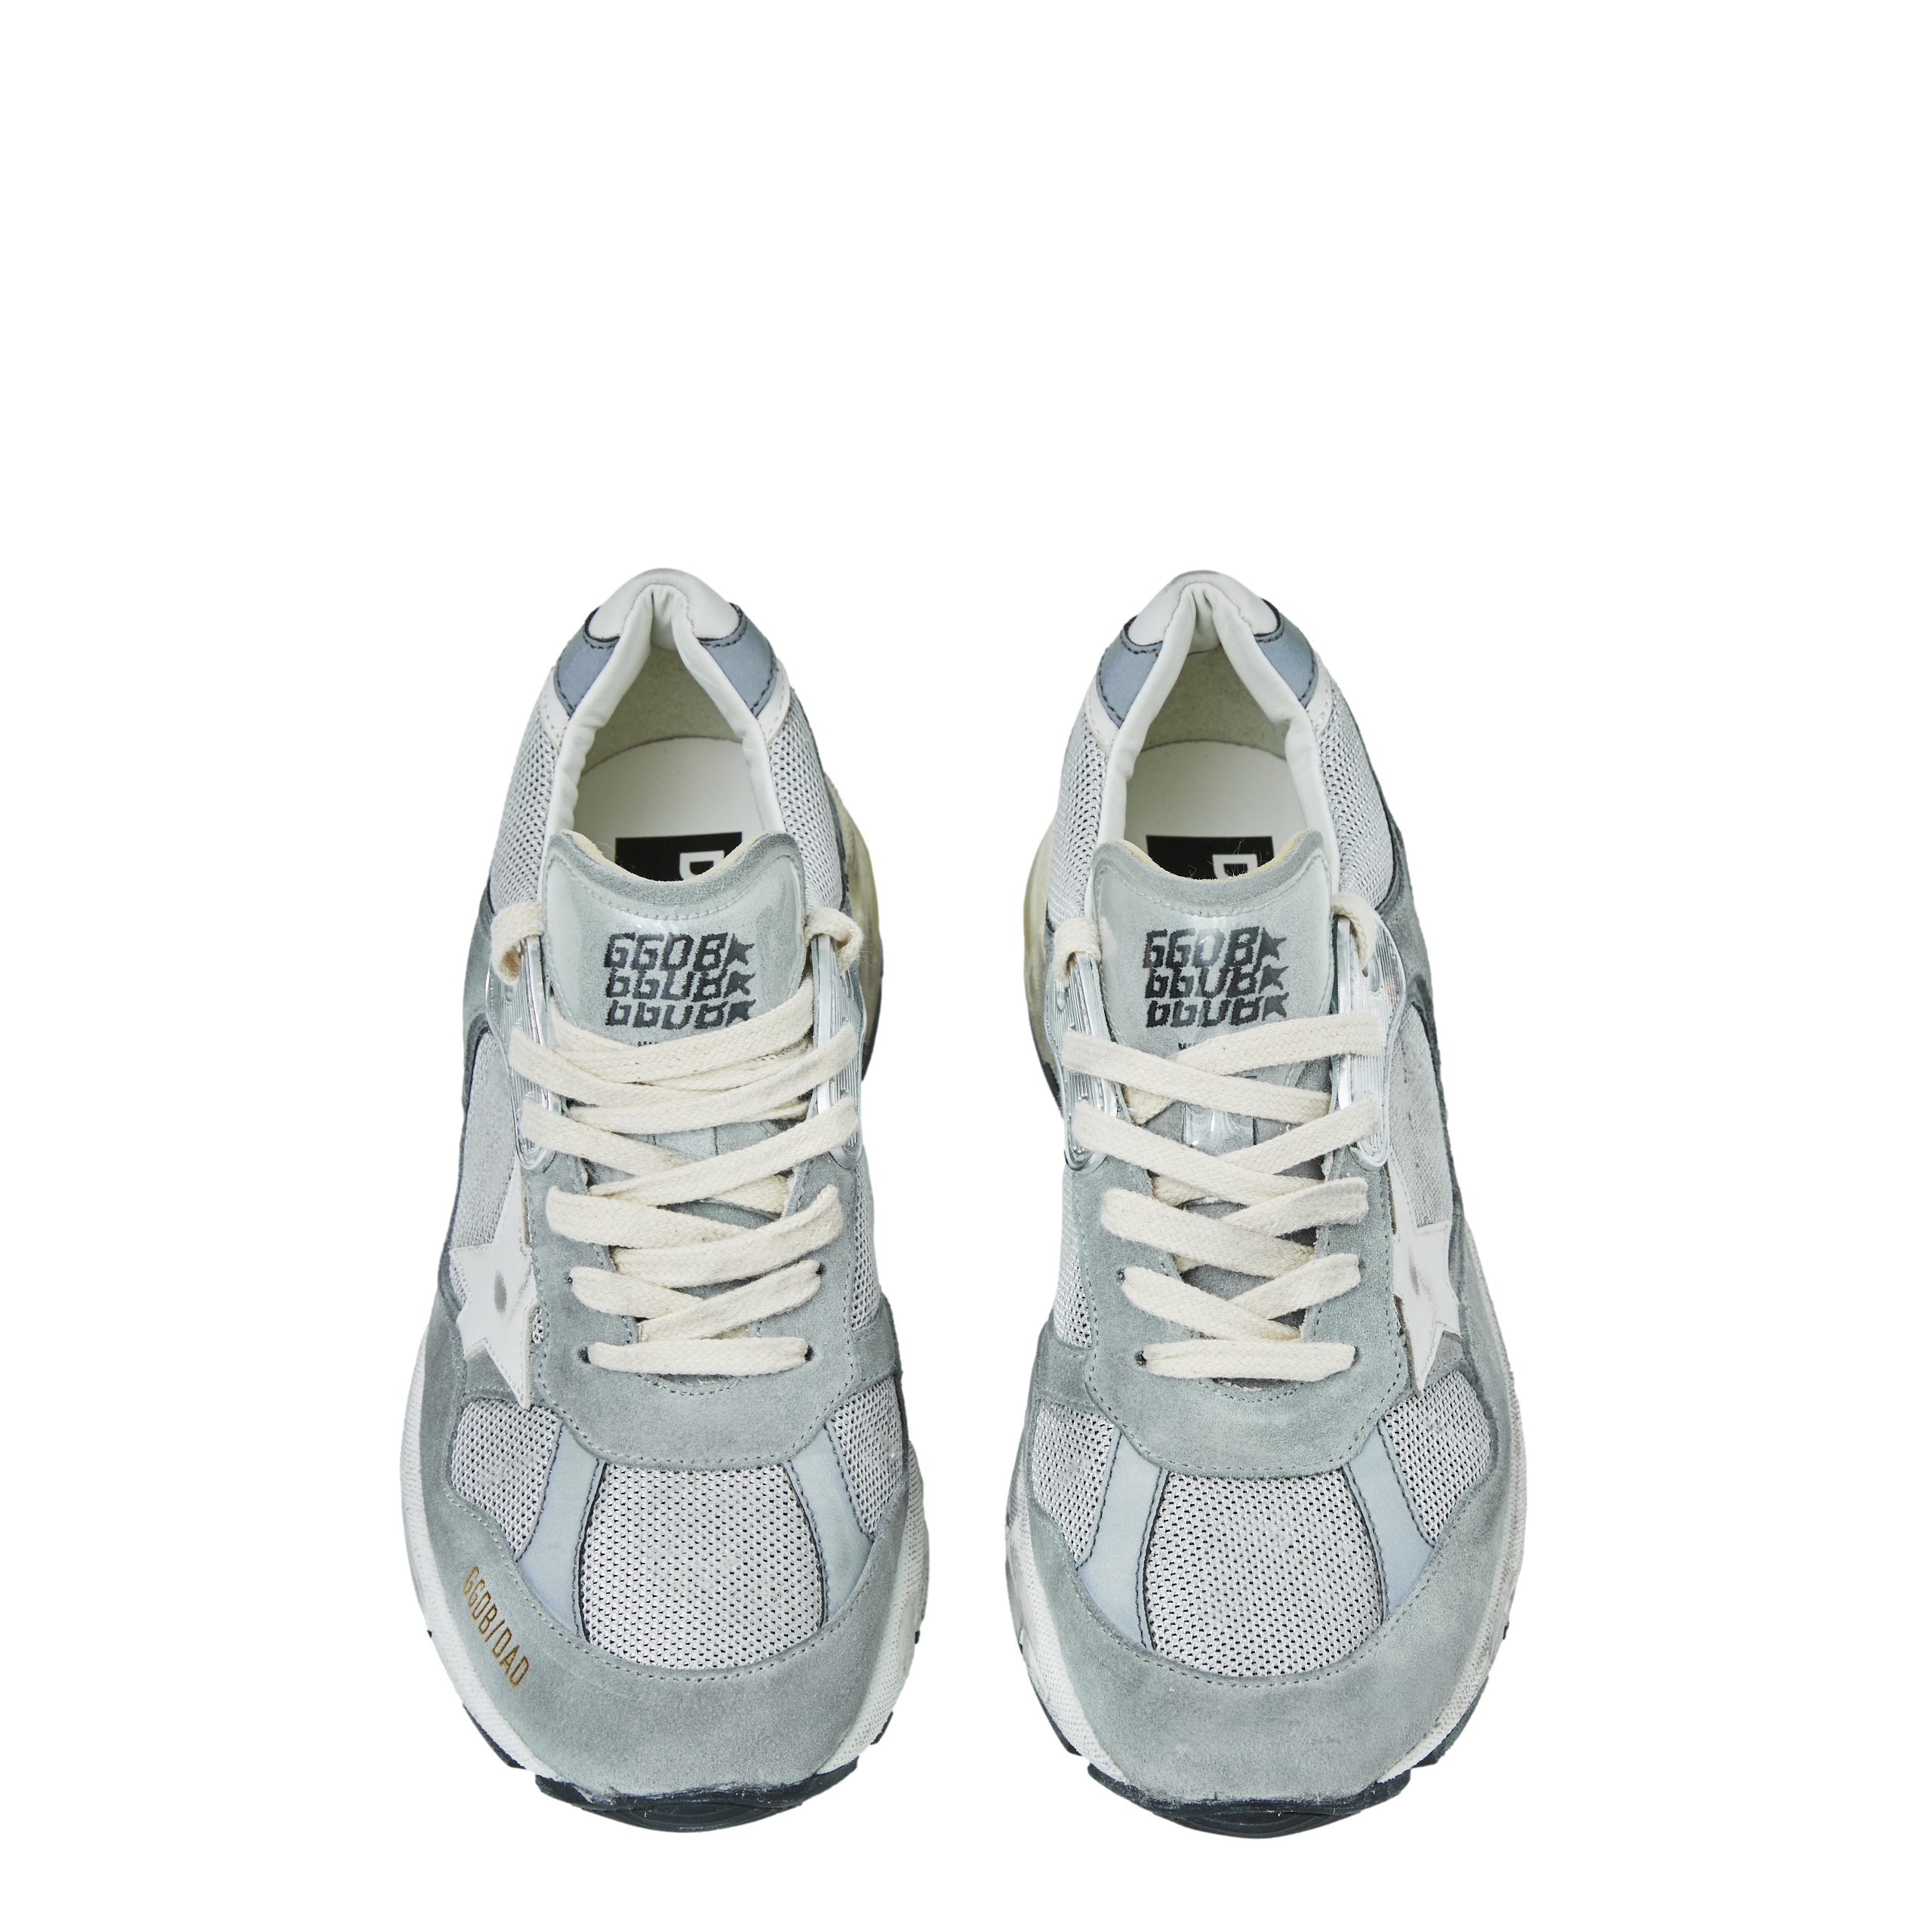 None Golden Goose Deluxe Brand GMF00558/F004944/60379, размер 41;43 GMF00558/F004944/60379 - фото 2